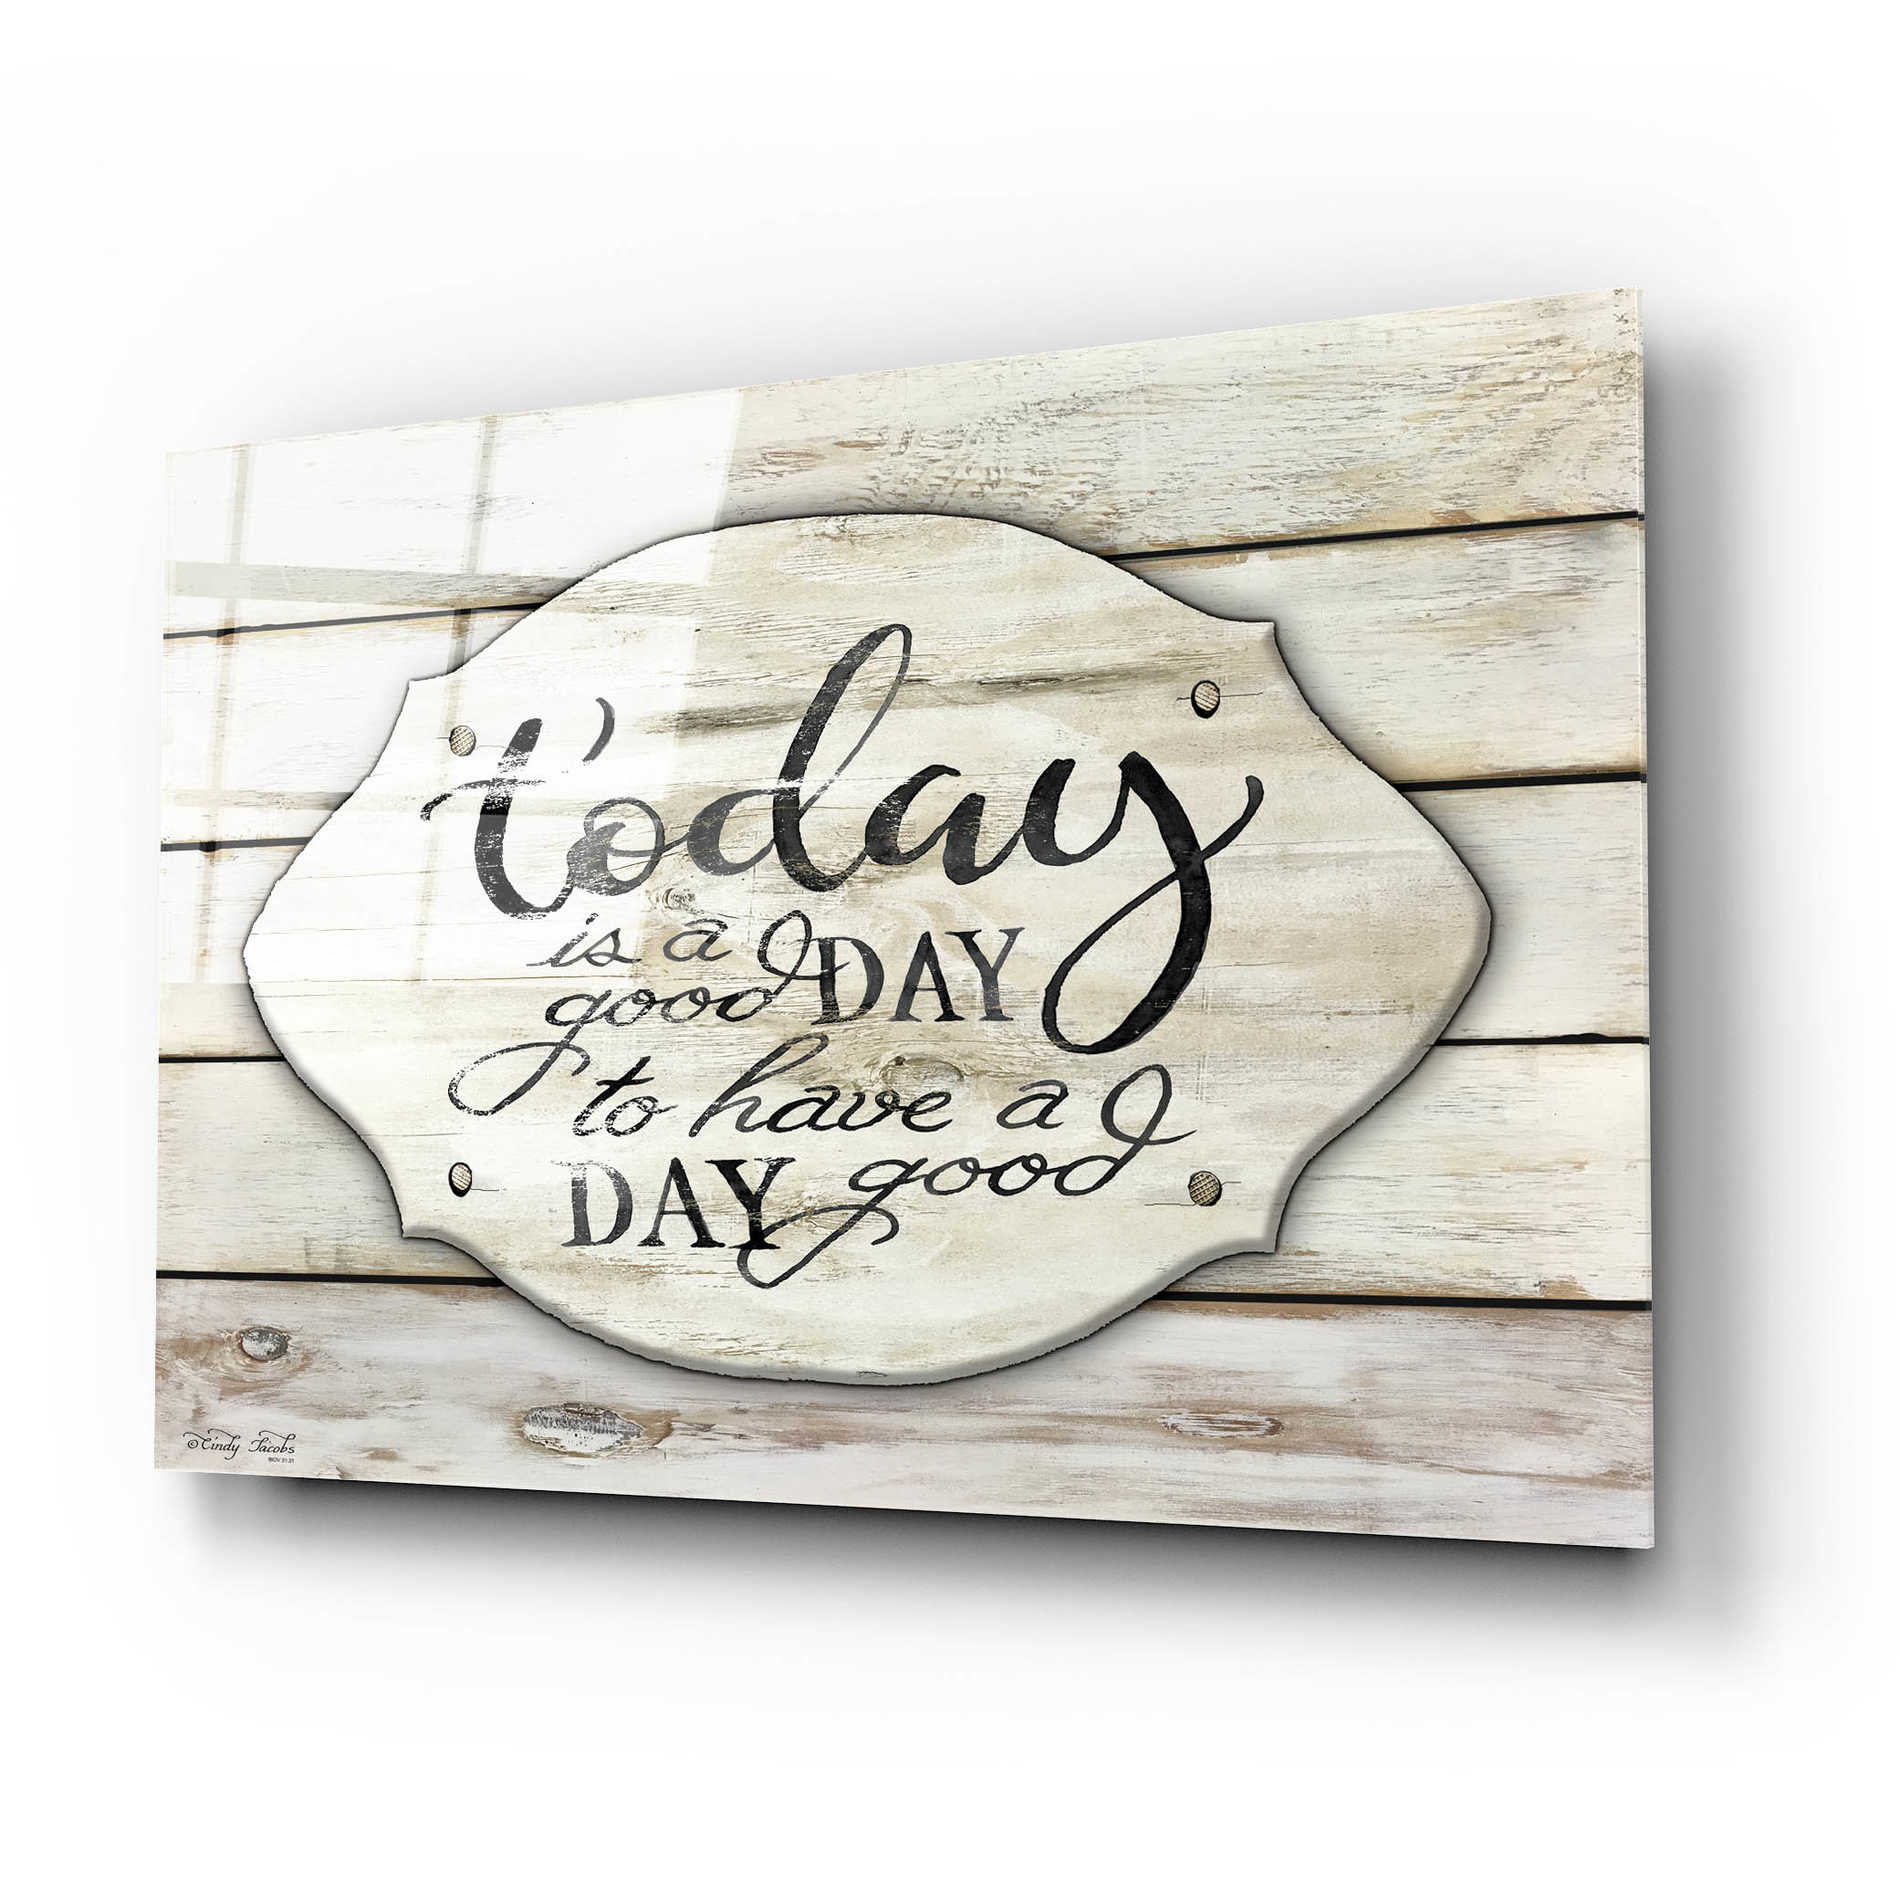 Epic Art 'Today is a Good Day' by Cindy Jacobs, Acrylic Glass Wall Art,24x16